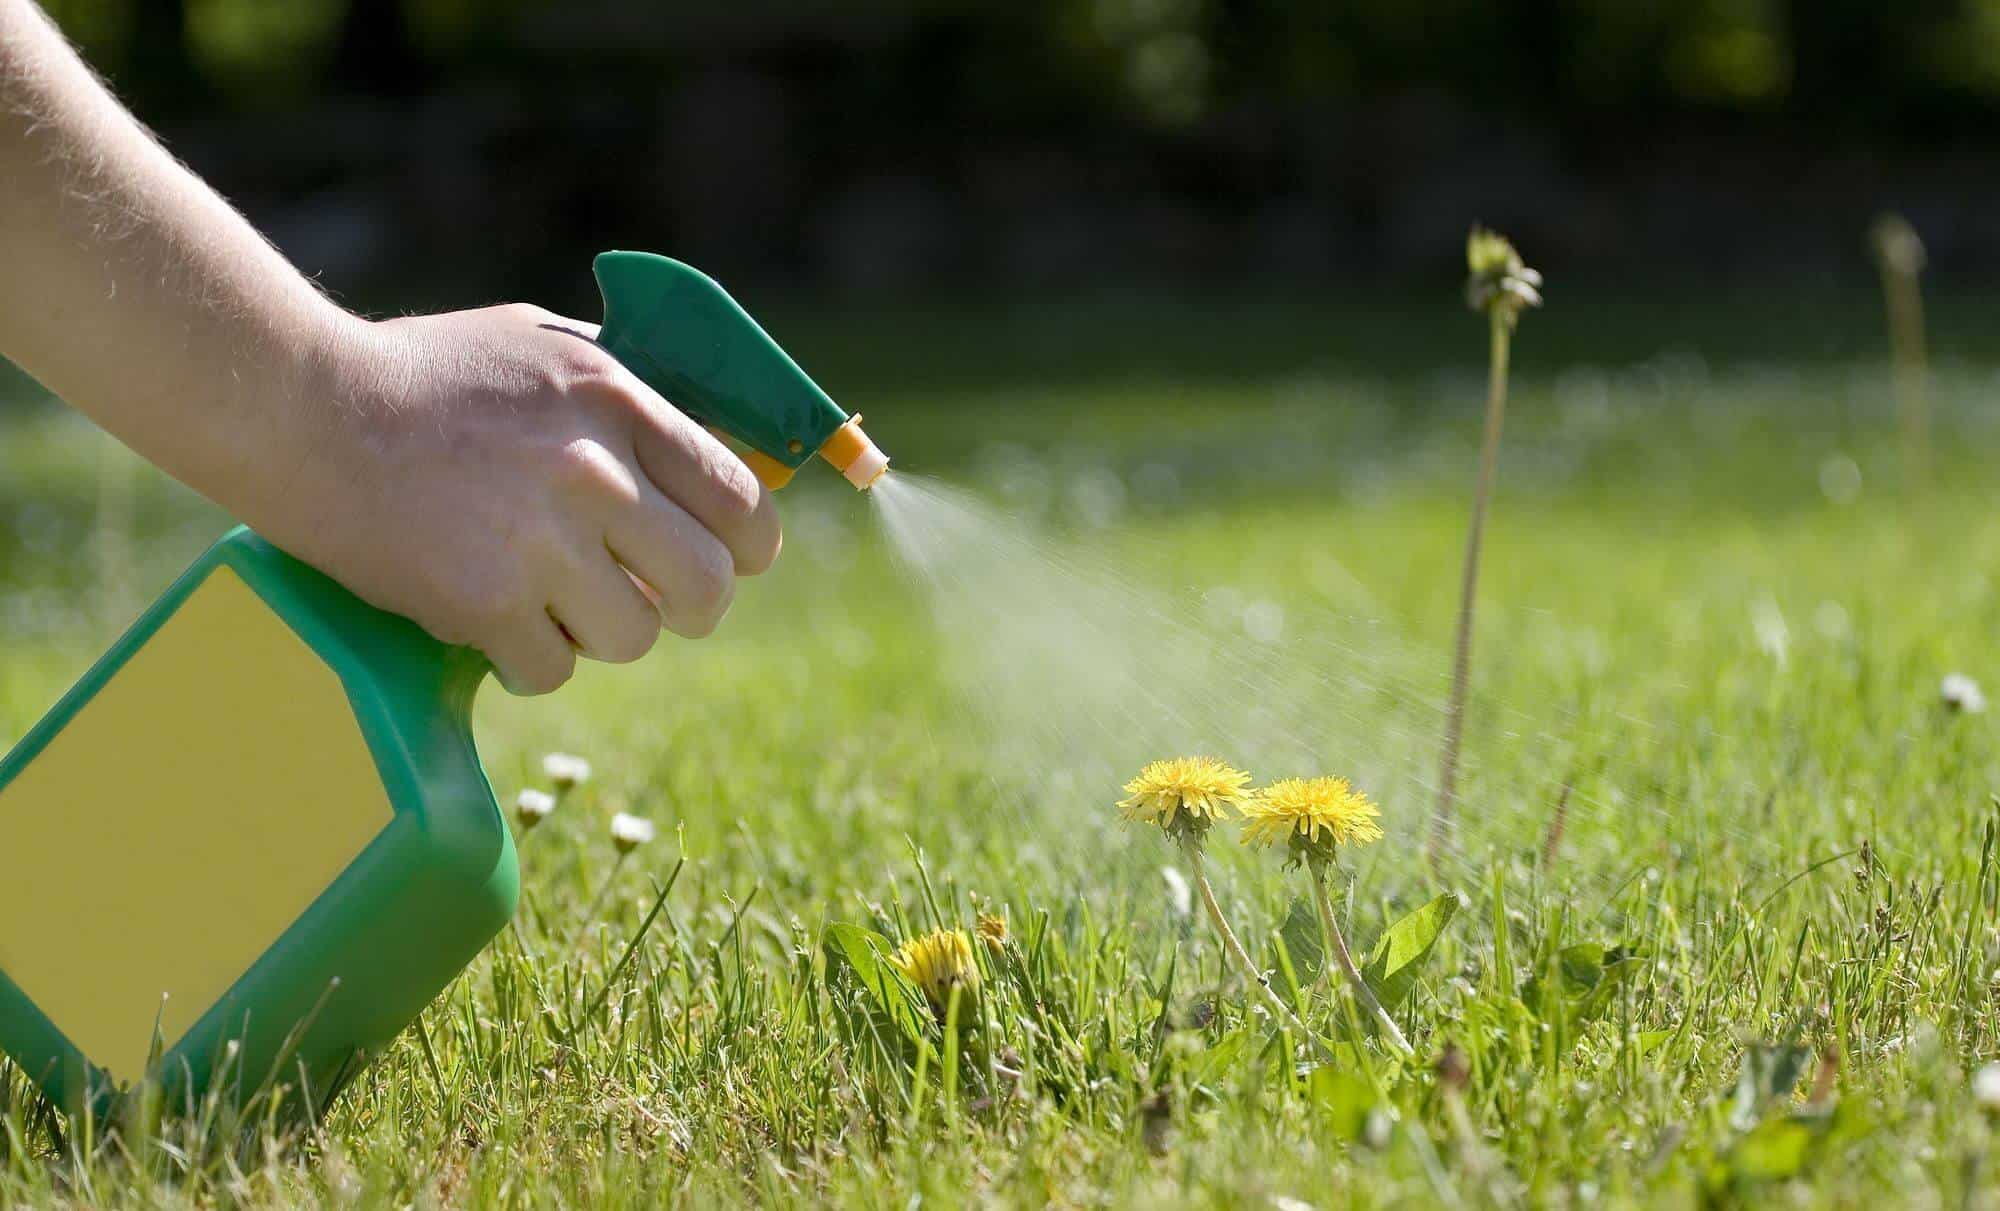 How To Make Homemade Weed Killer For Lawns